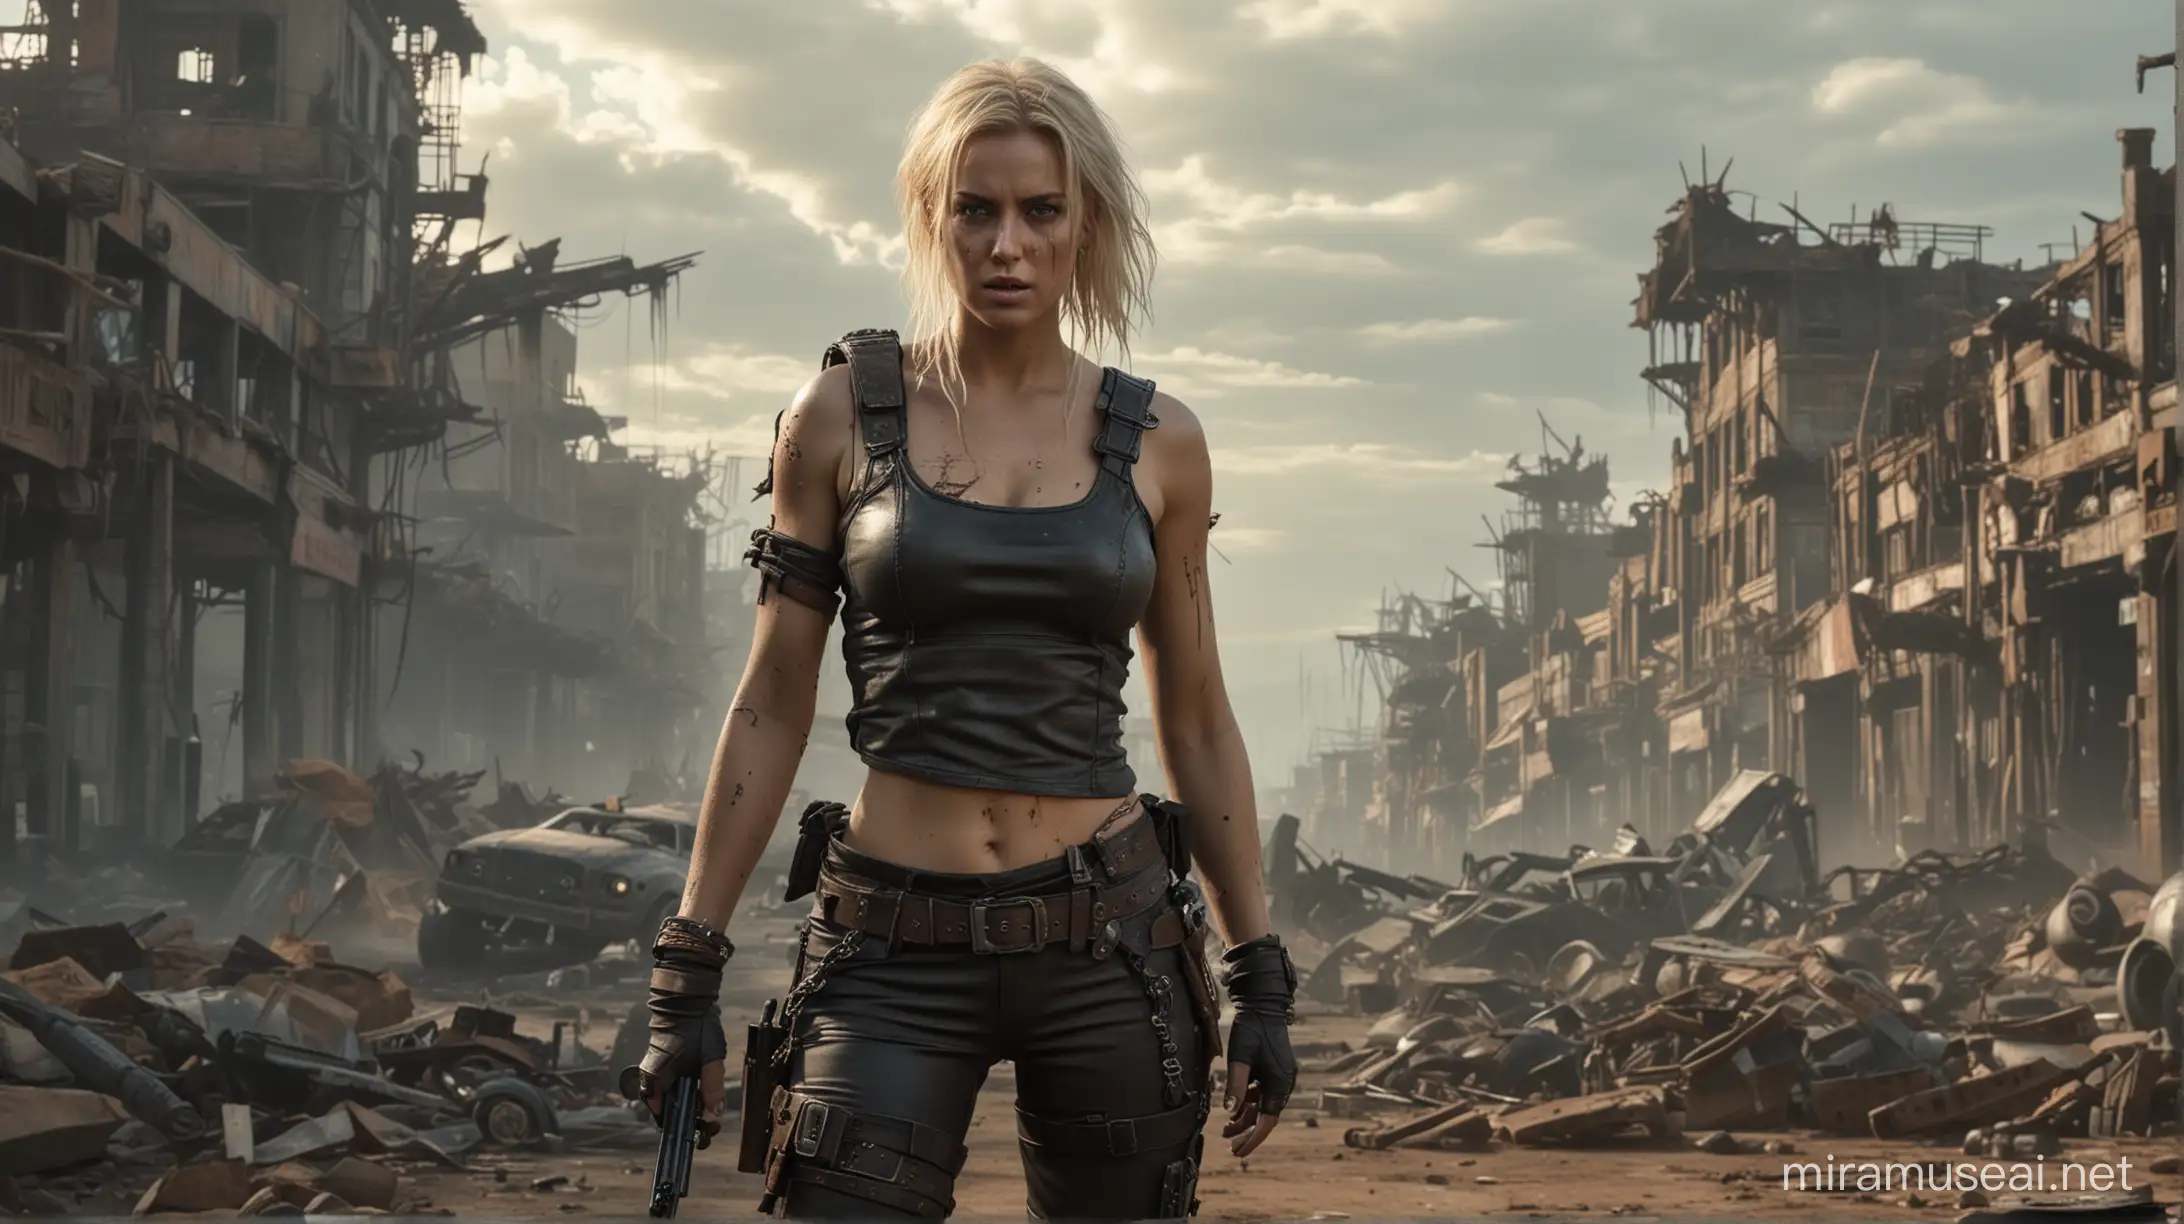 Blond Woman in MadMax Outfit Battling Zombies in PostApocalyptic Cyberpunk City